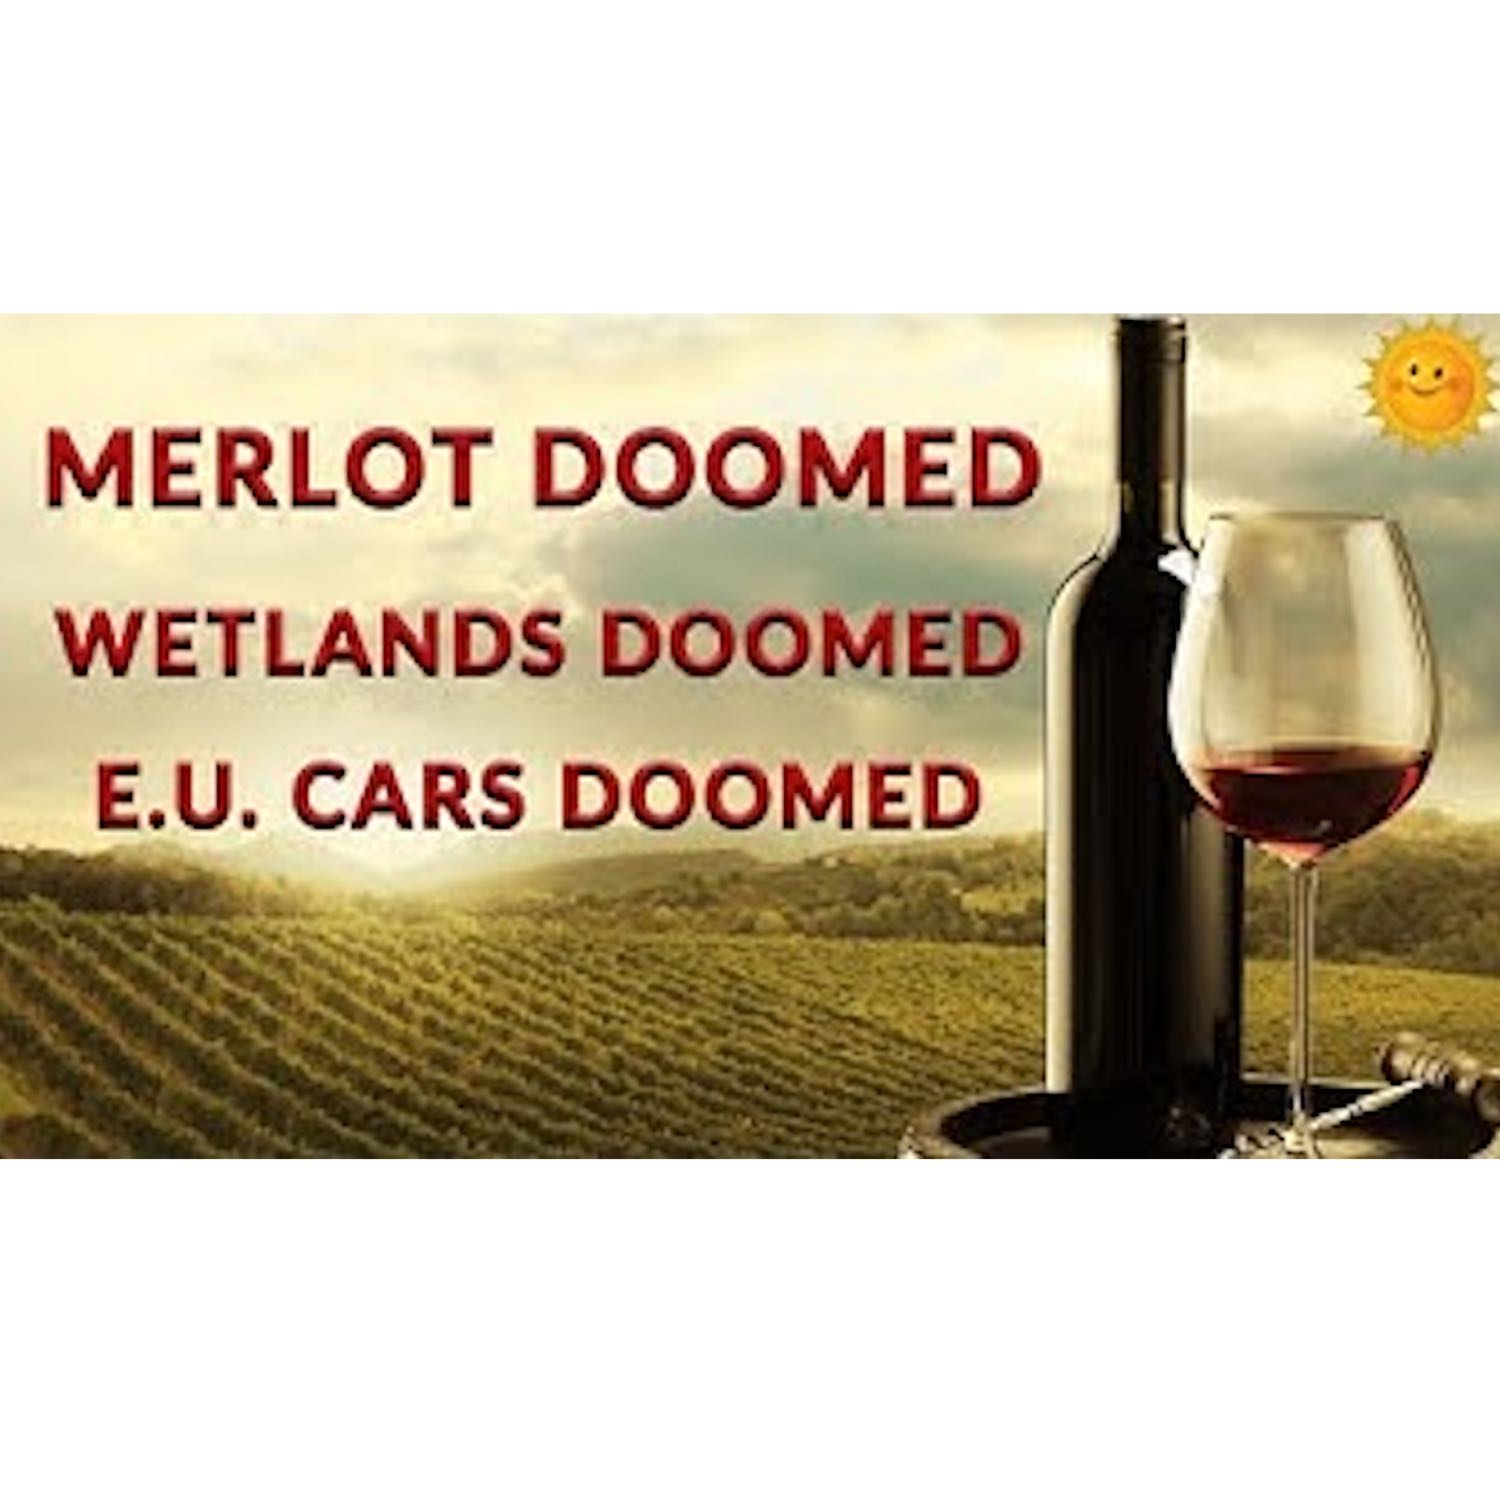 Of Merlot, Swamps and Rainfall - Newsletter Readout